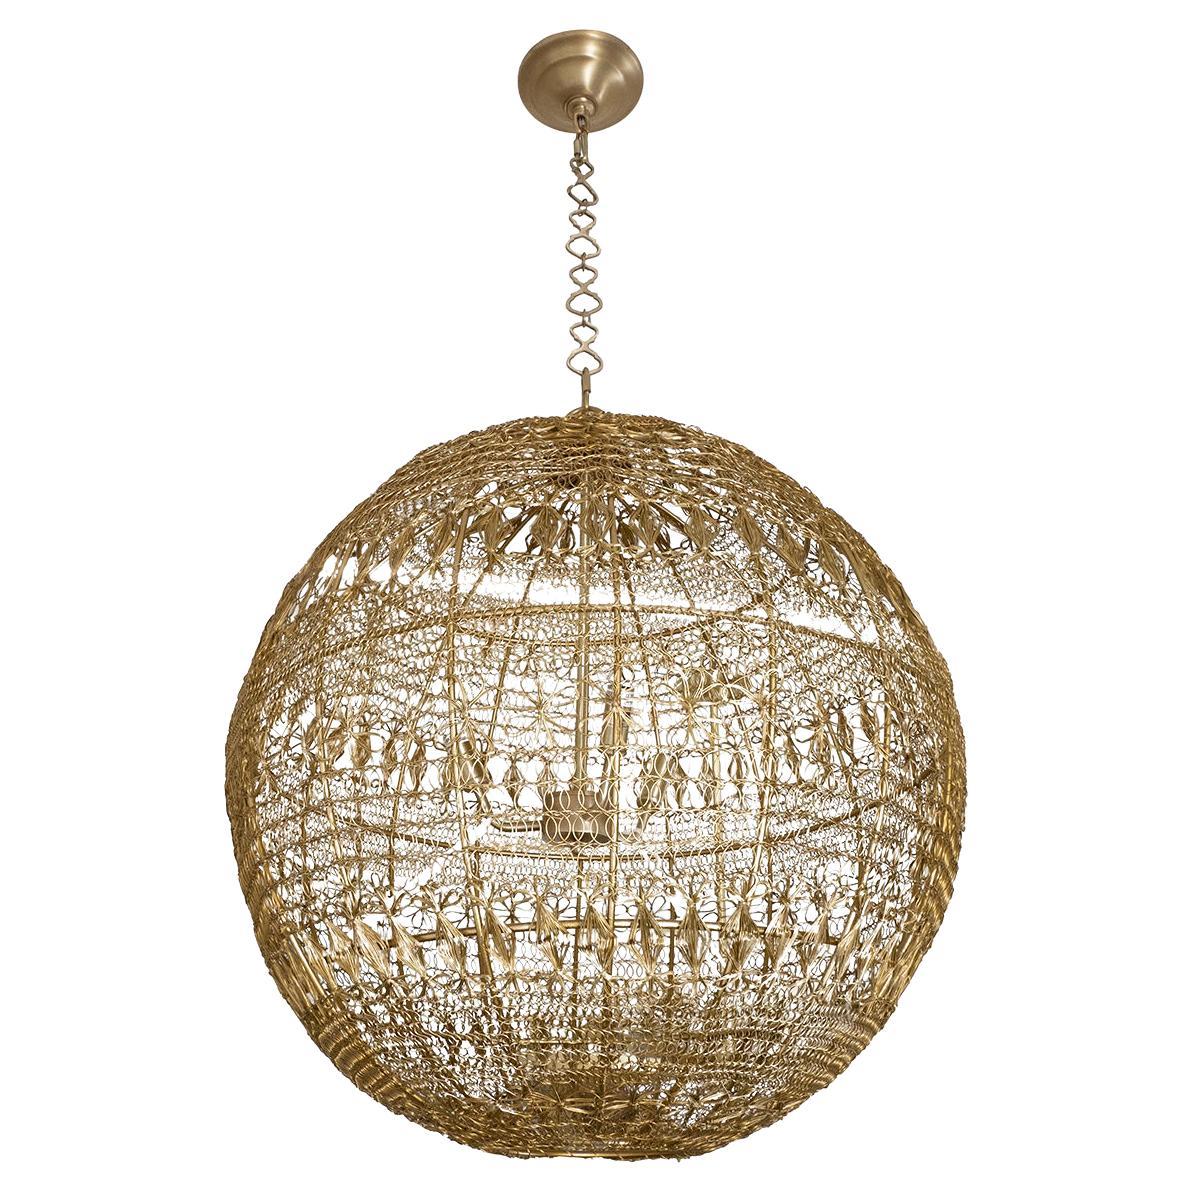 Monumental wrought brass wire pendant